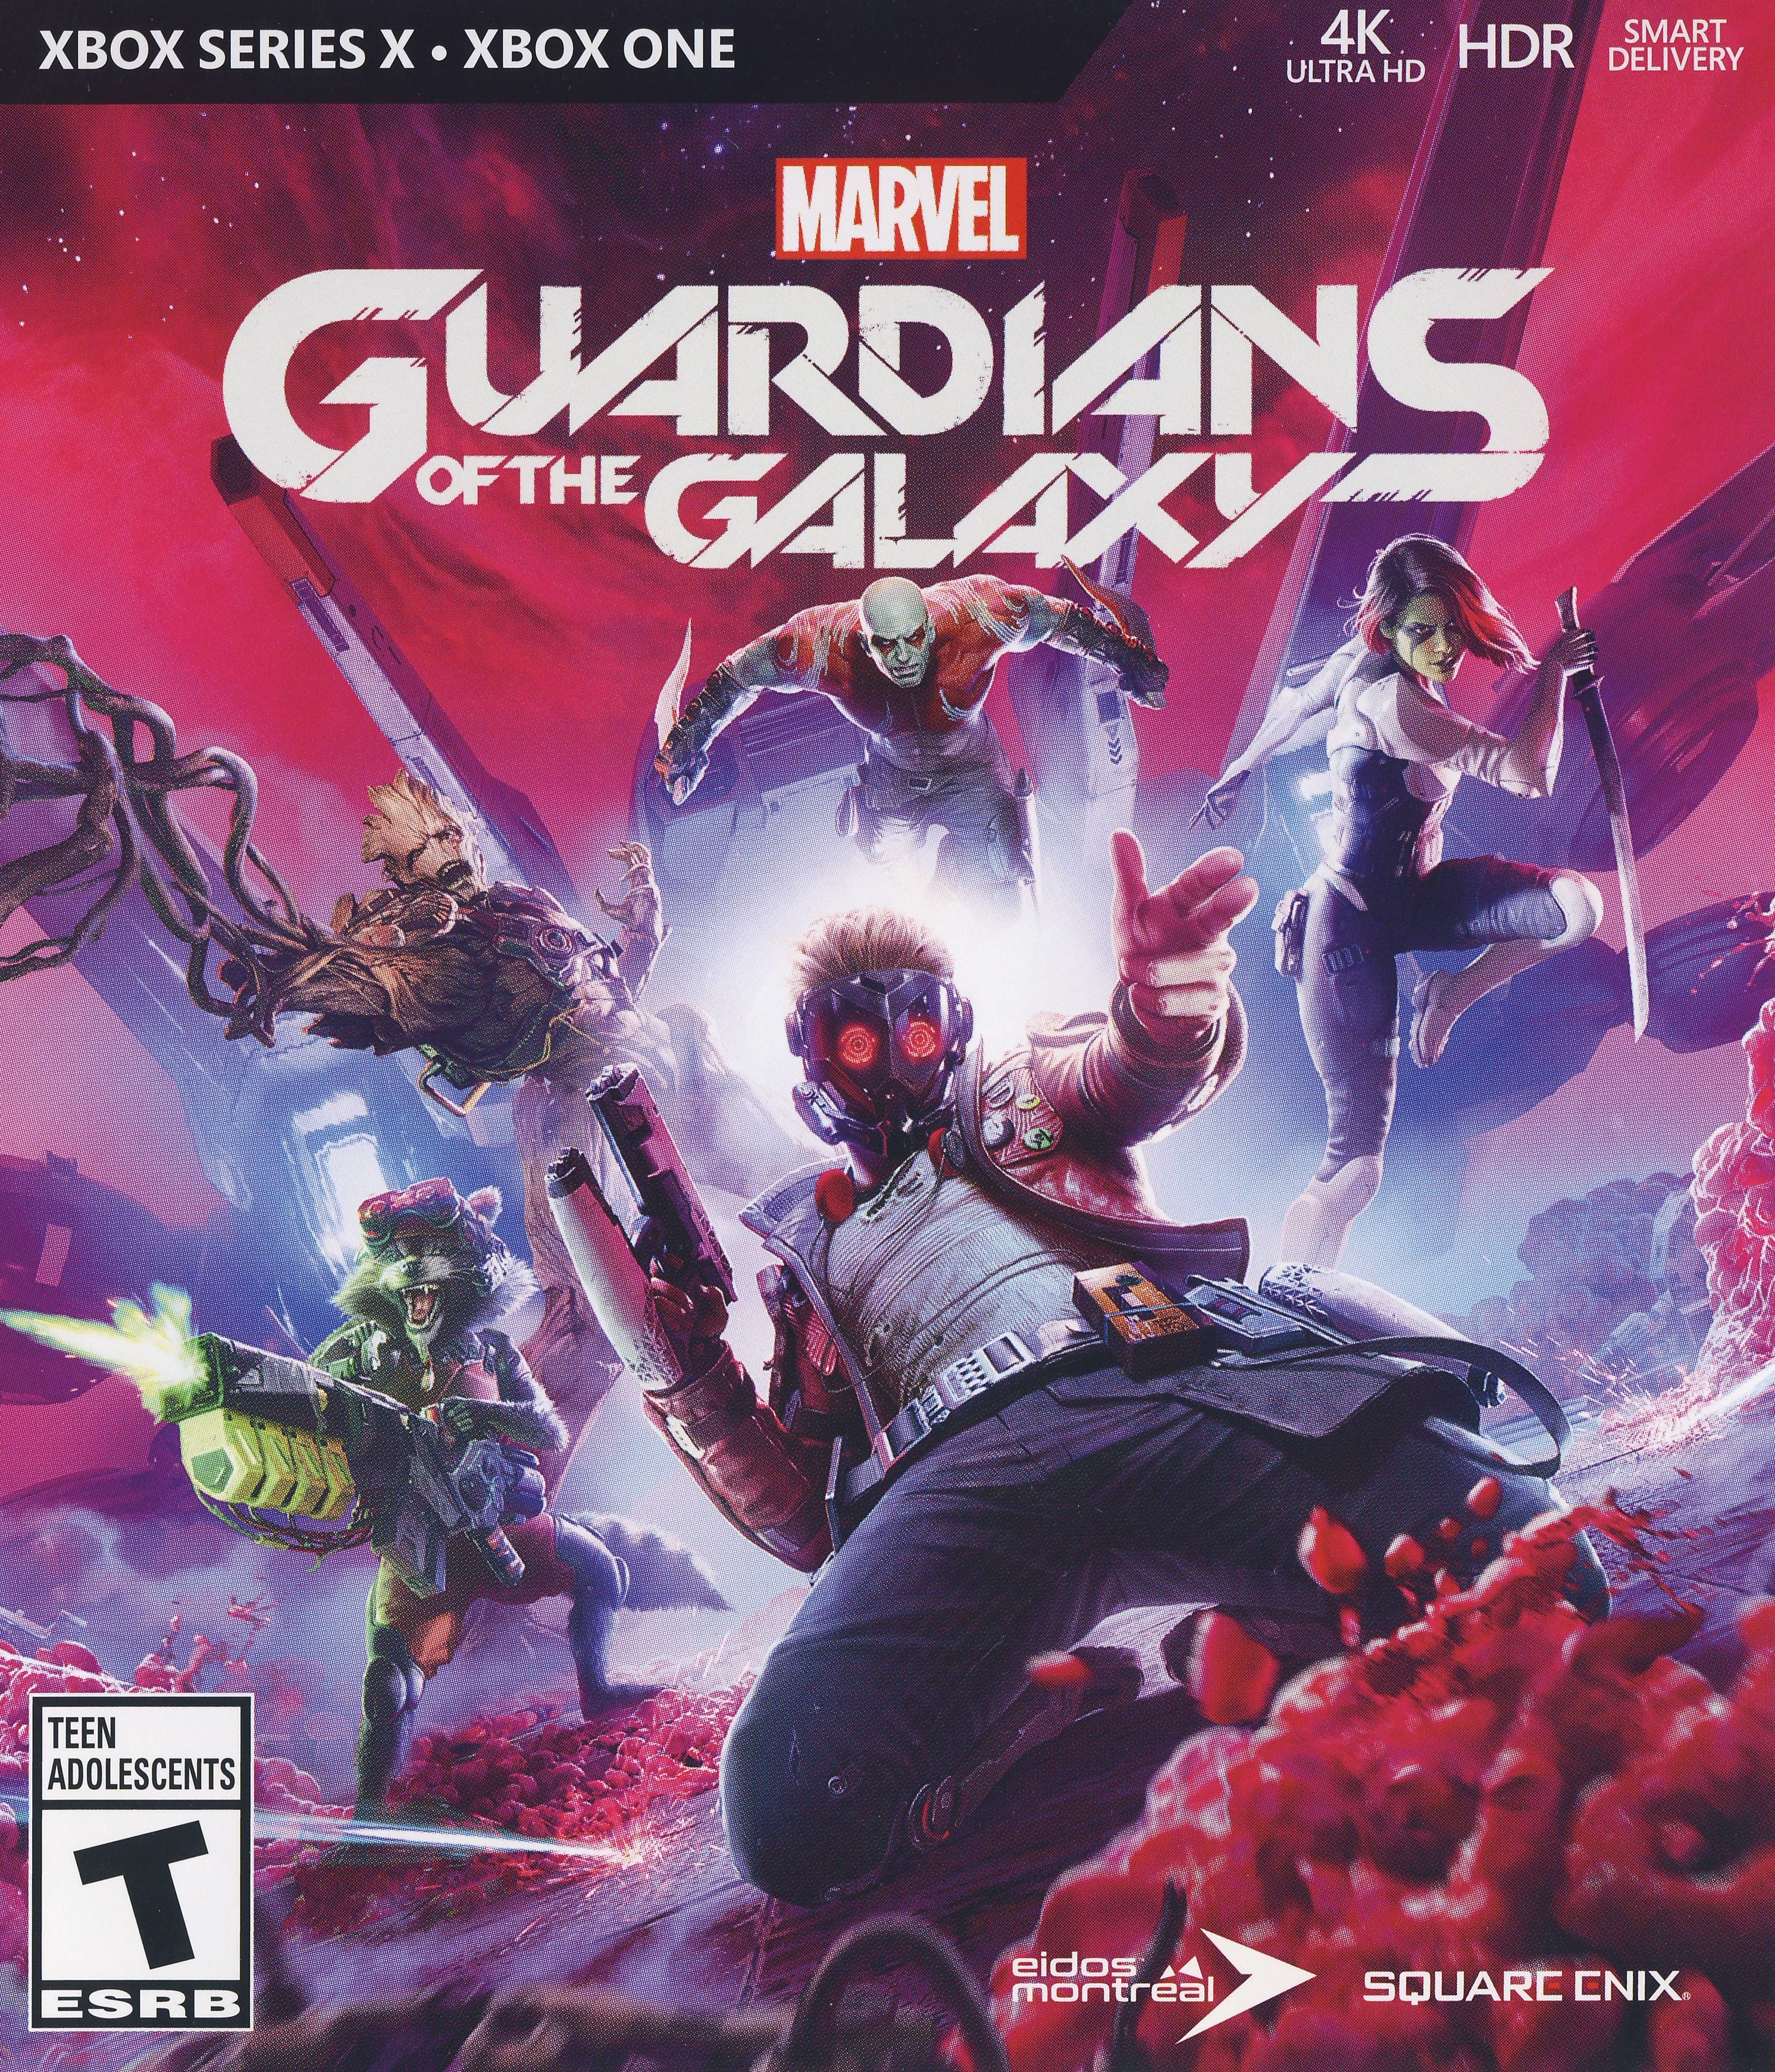 'Marvel: Guardians of the Galaxy'